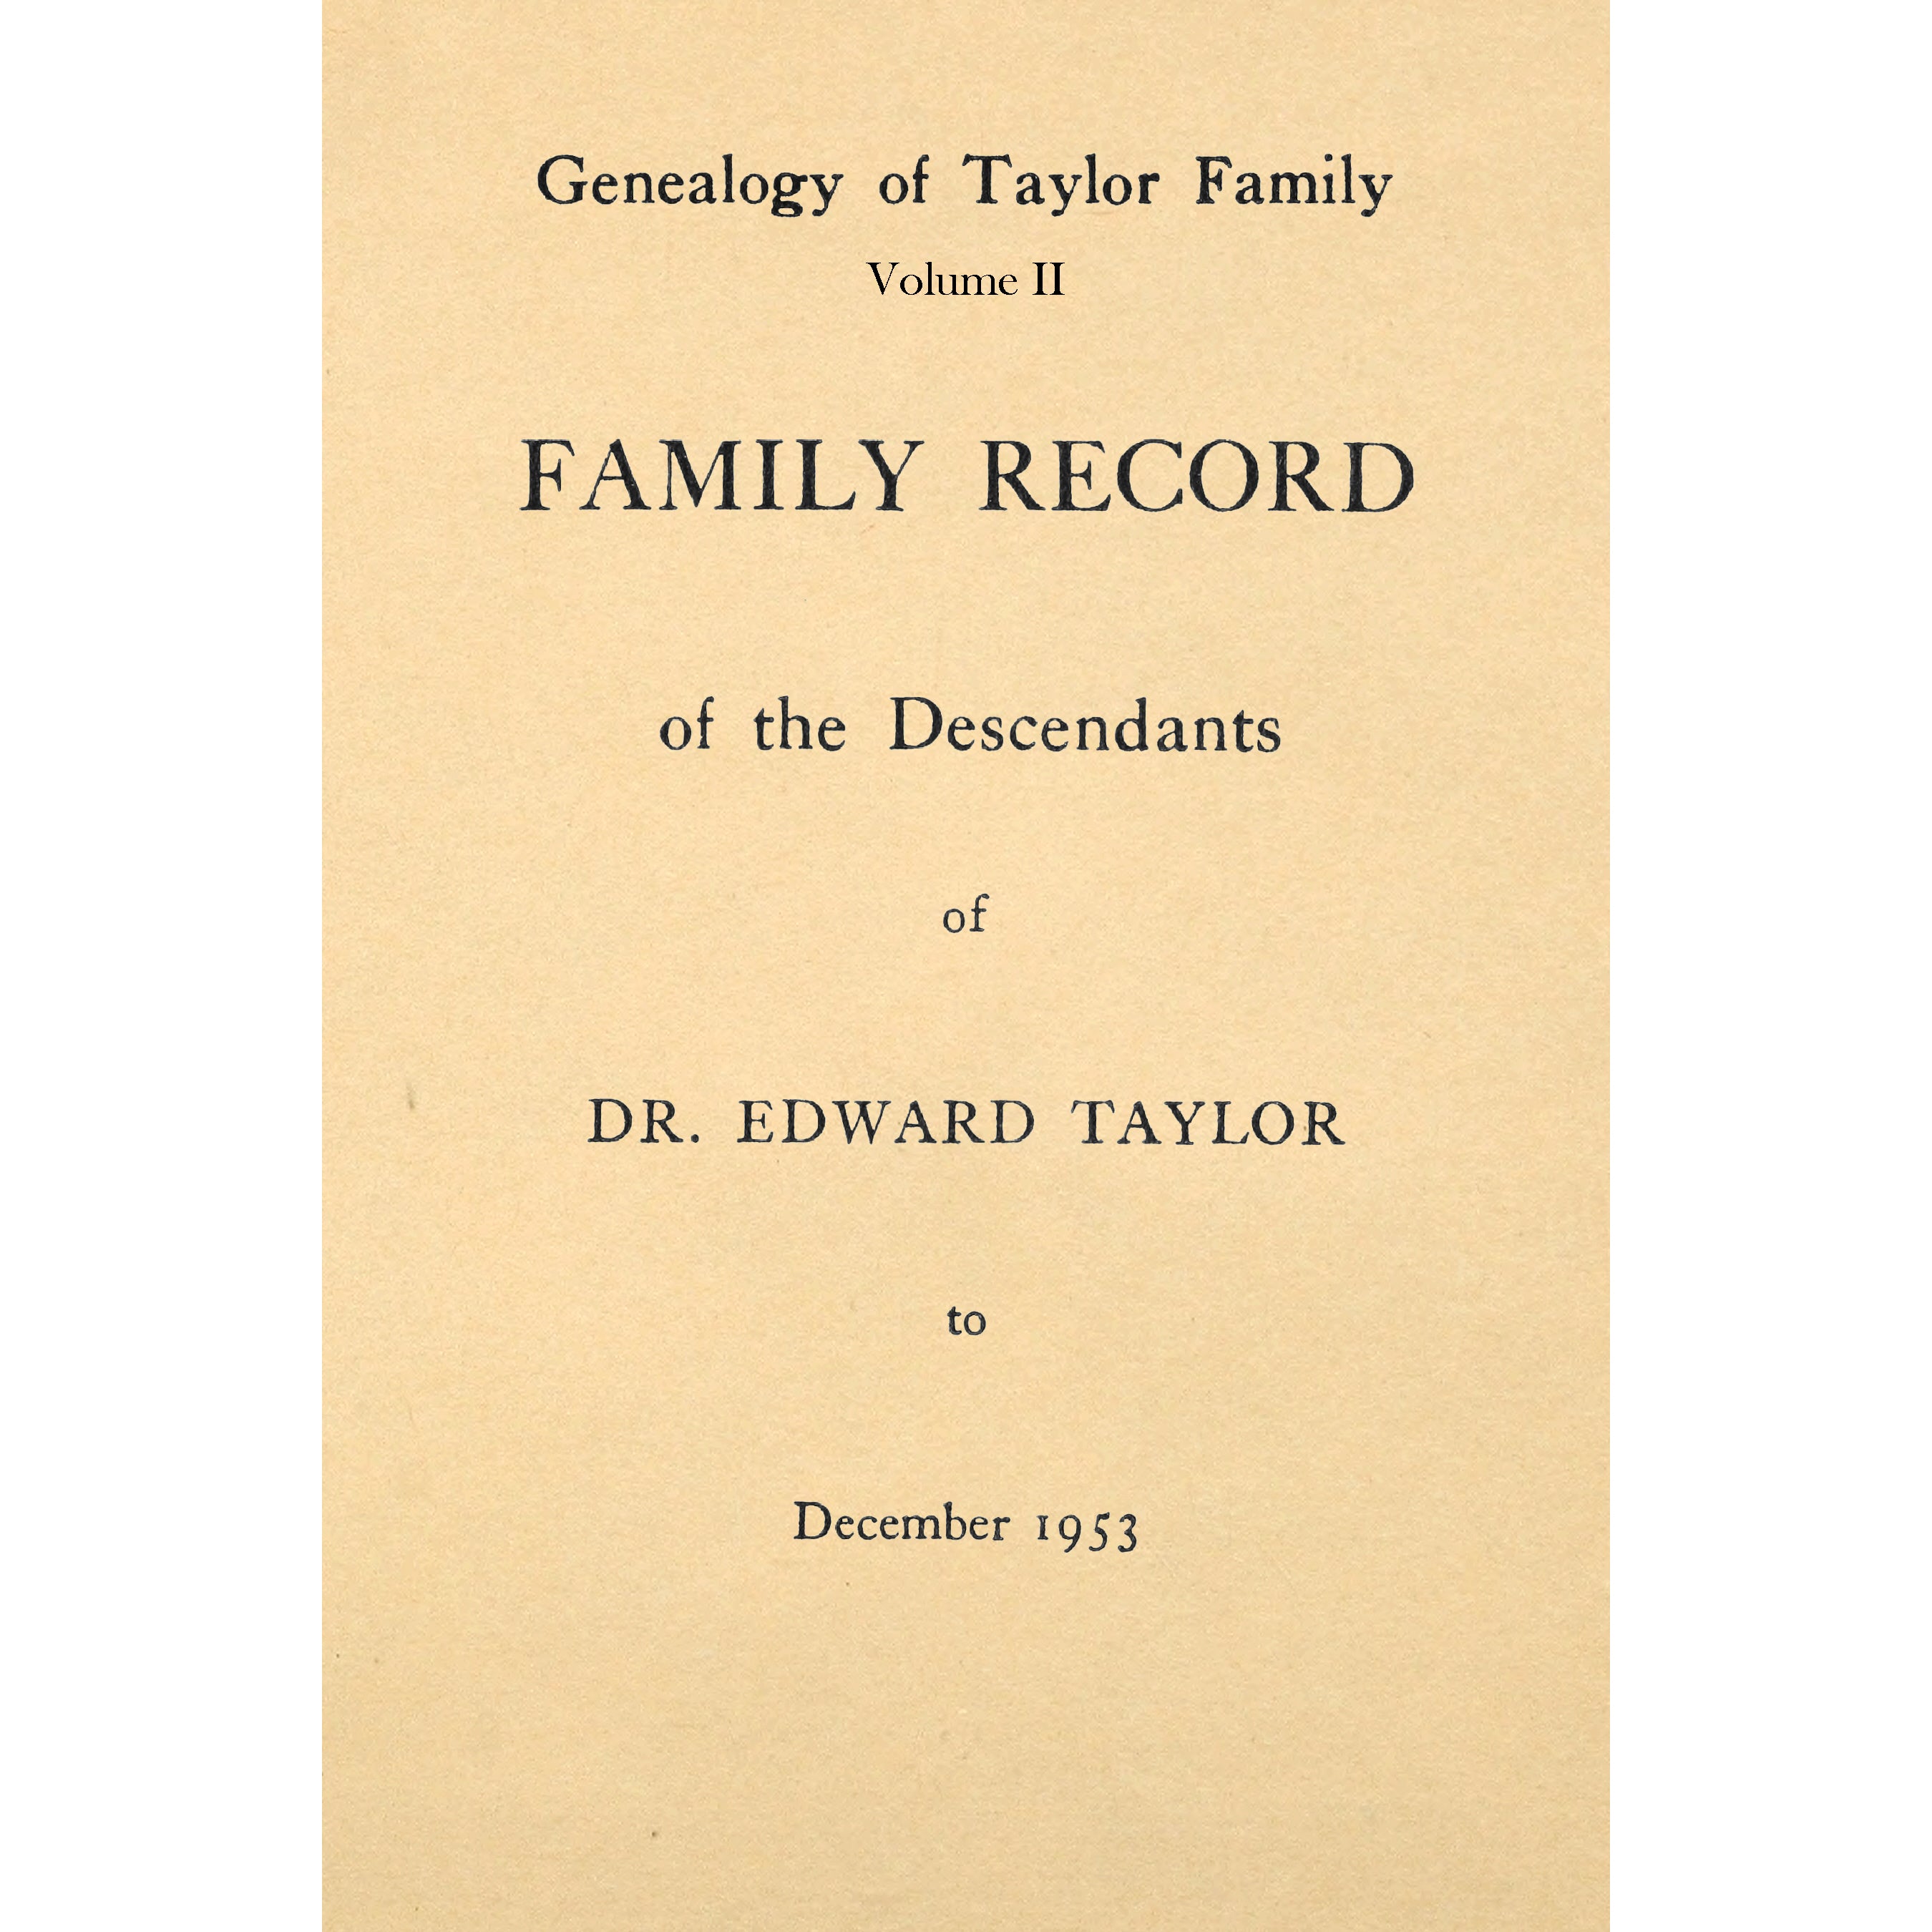 Family Record of the Descendants of Dr. Edward Taylor to December 1953